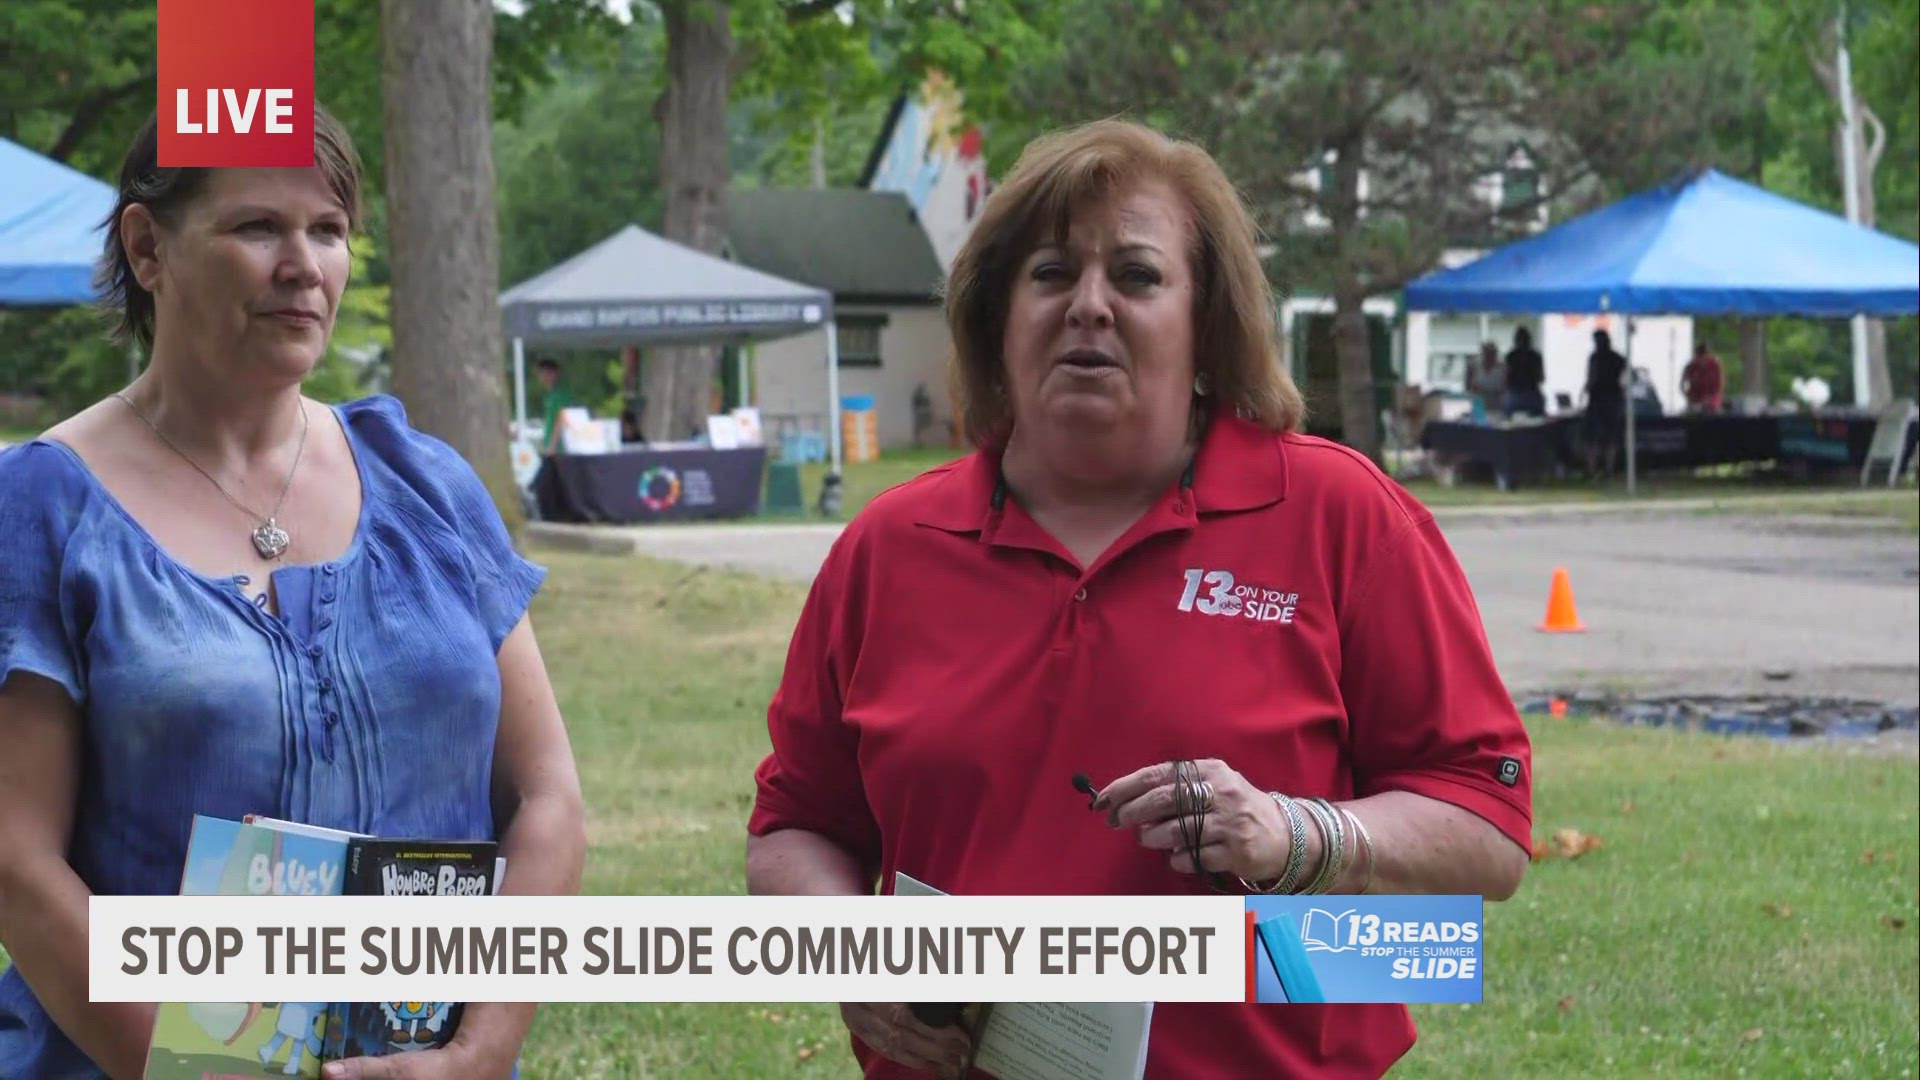 The 13 Reads: Stop the Summer Slide campaign is designed to get kids and families reading together.